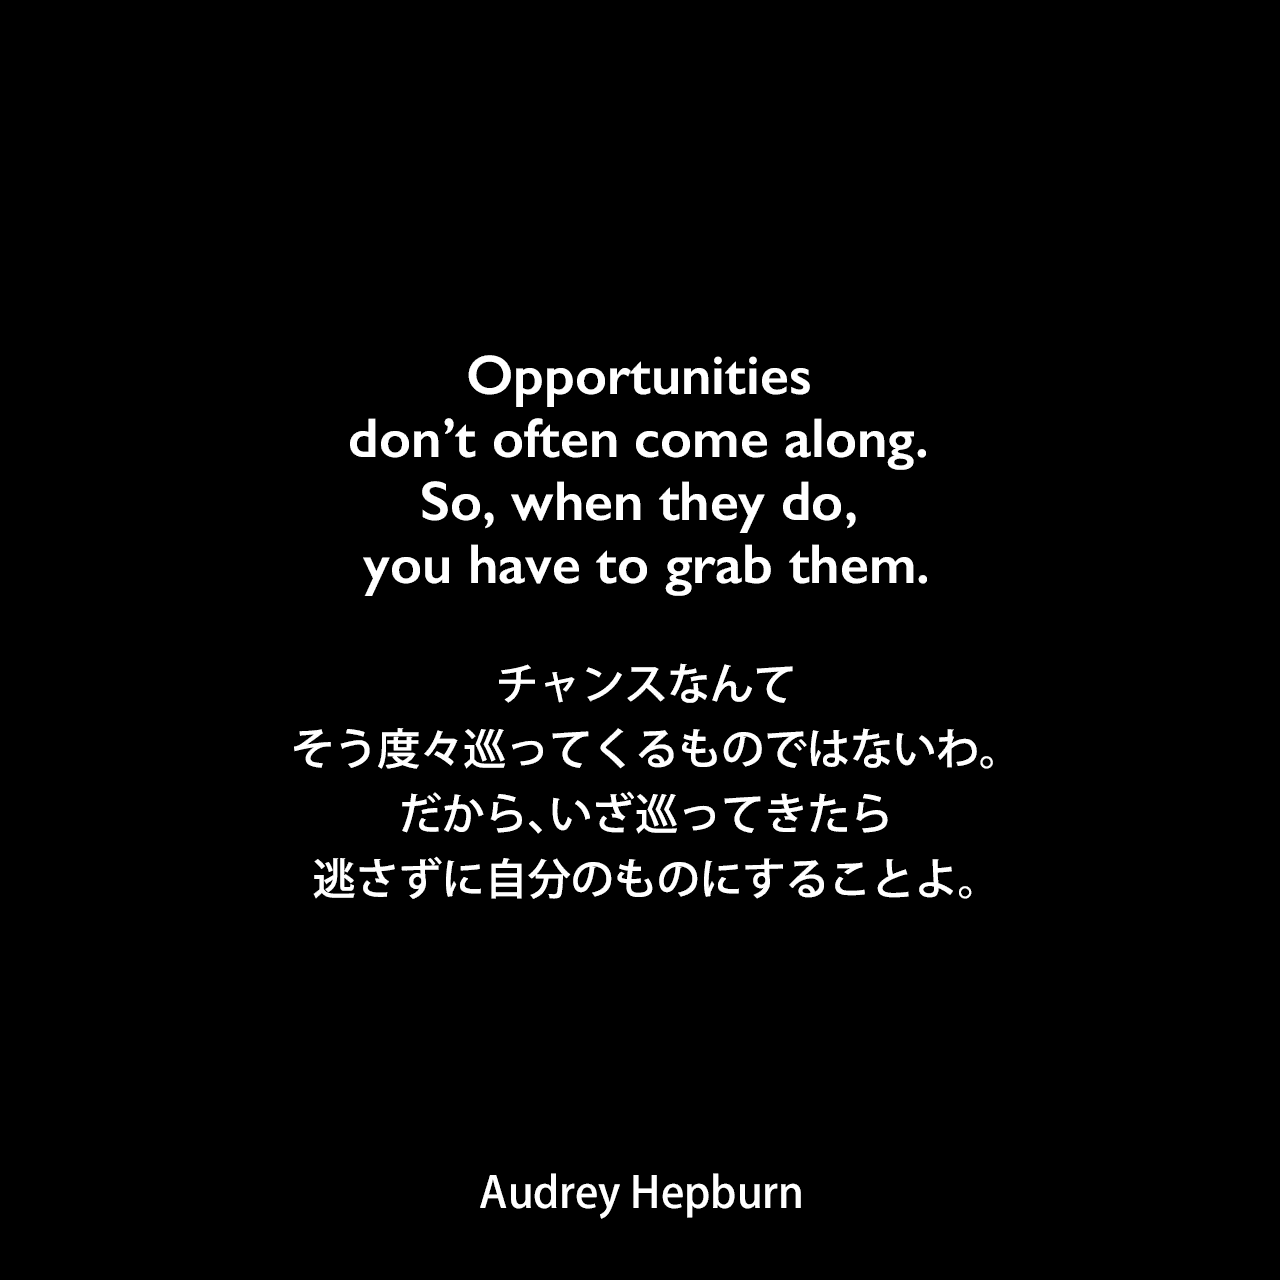 Opportunities don’t often come along. So, when they do, you have to grab them.チャンスなんて、そう度々巡ってくるものではないわ。だから、いざ巡ってきたら、逃さずに自分のものにすることよ。Audrey Hepburn